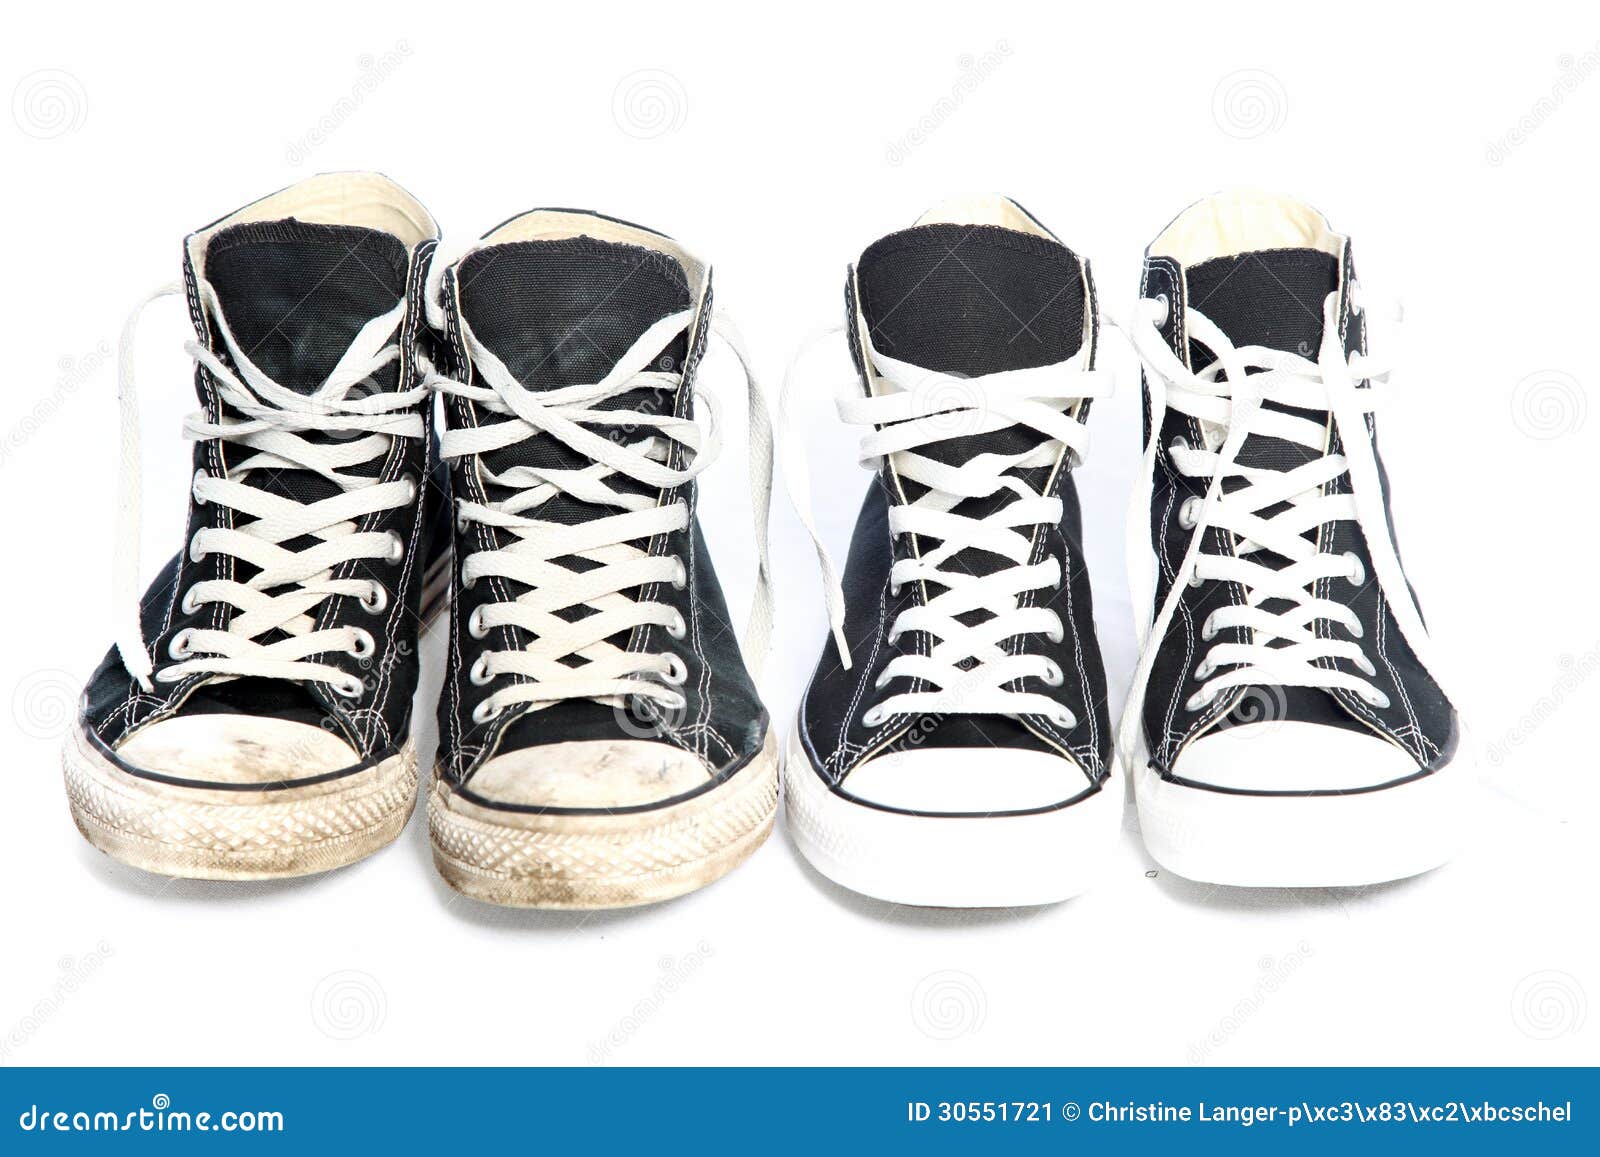 Two Pairs of Sneakers - One Old, One New Stock Image - Image of ...